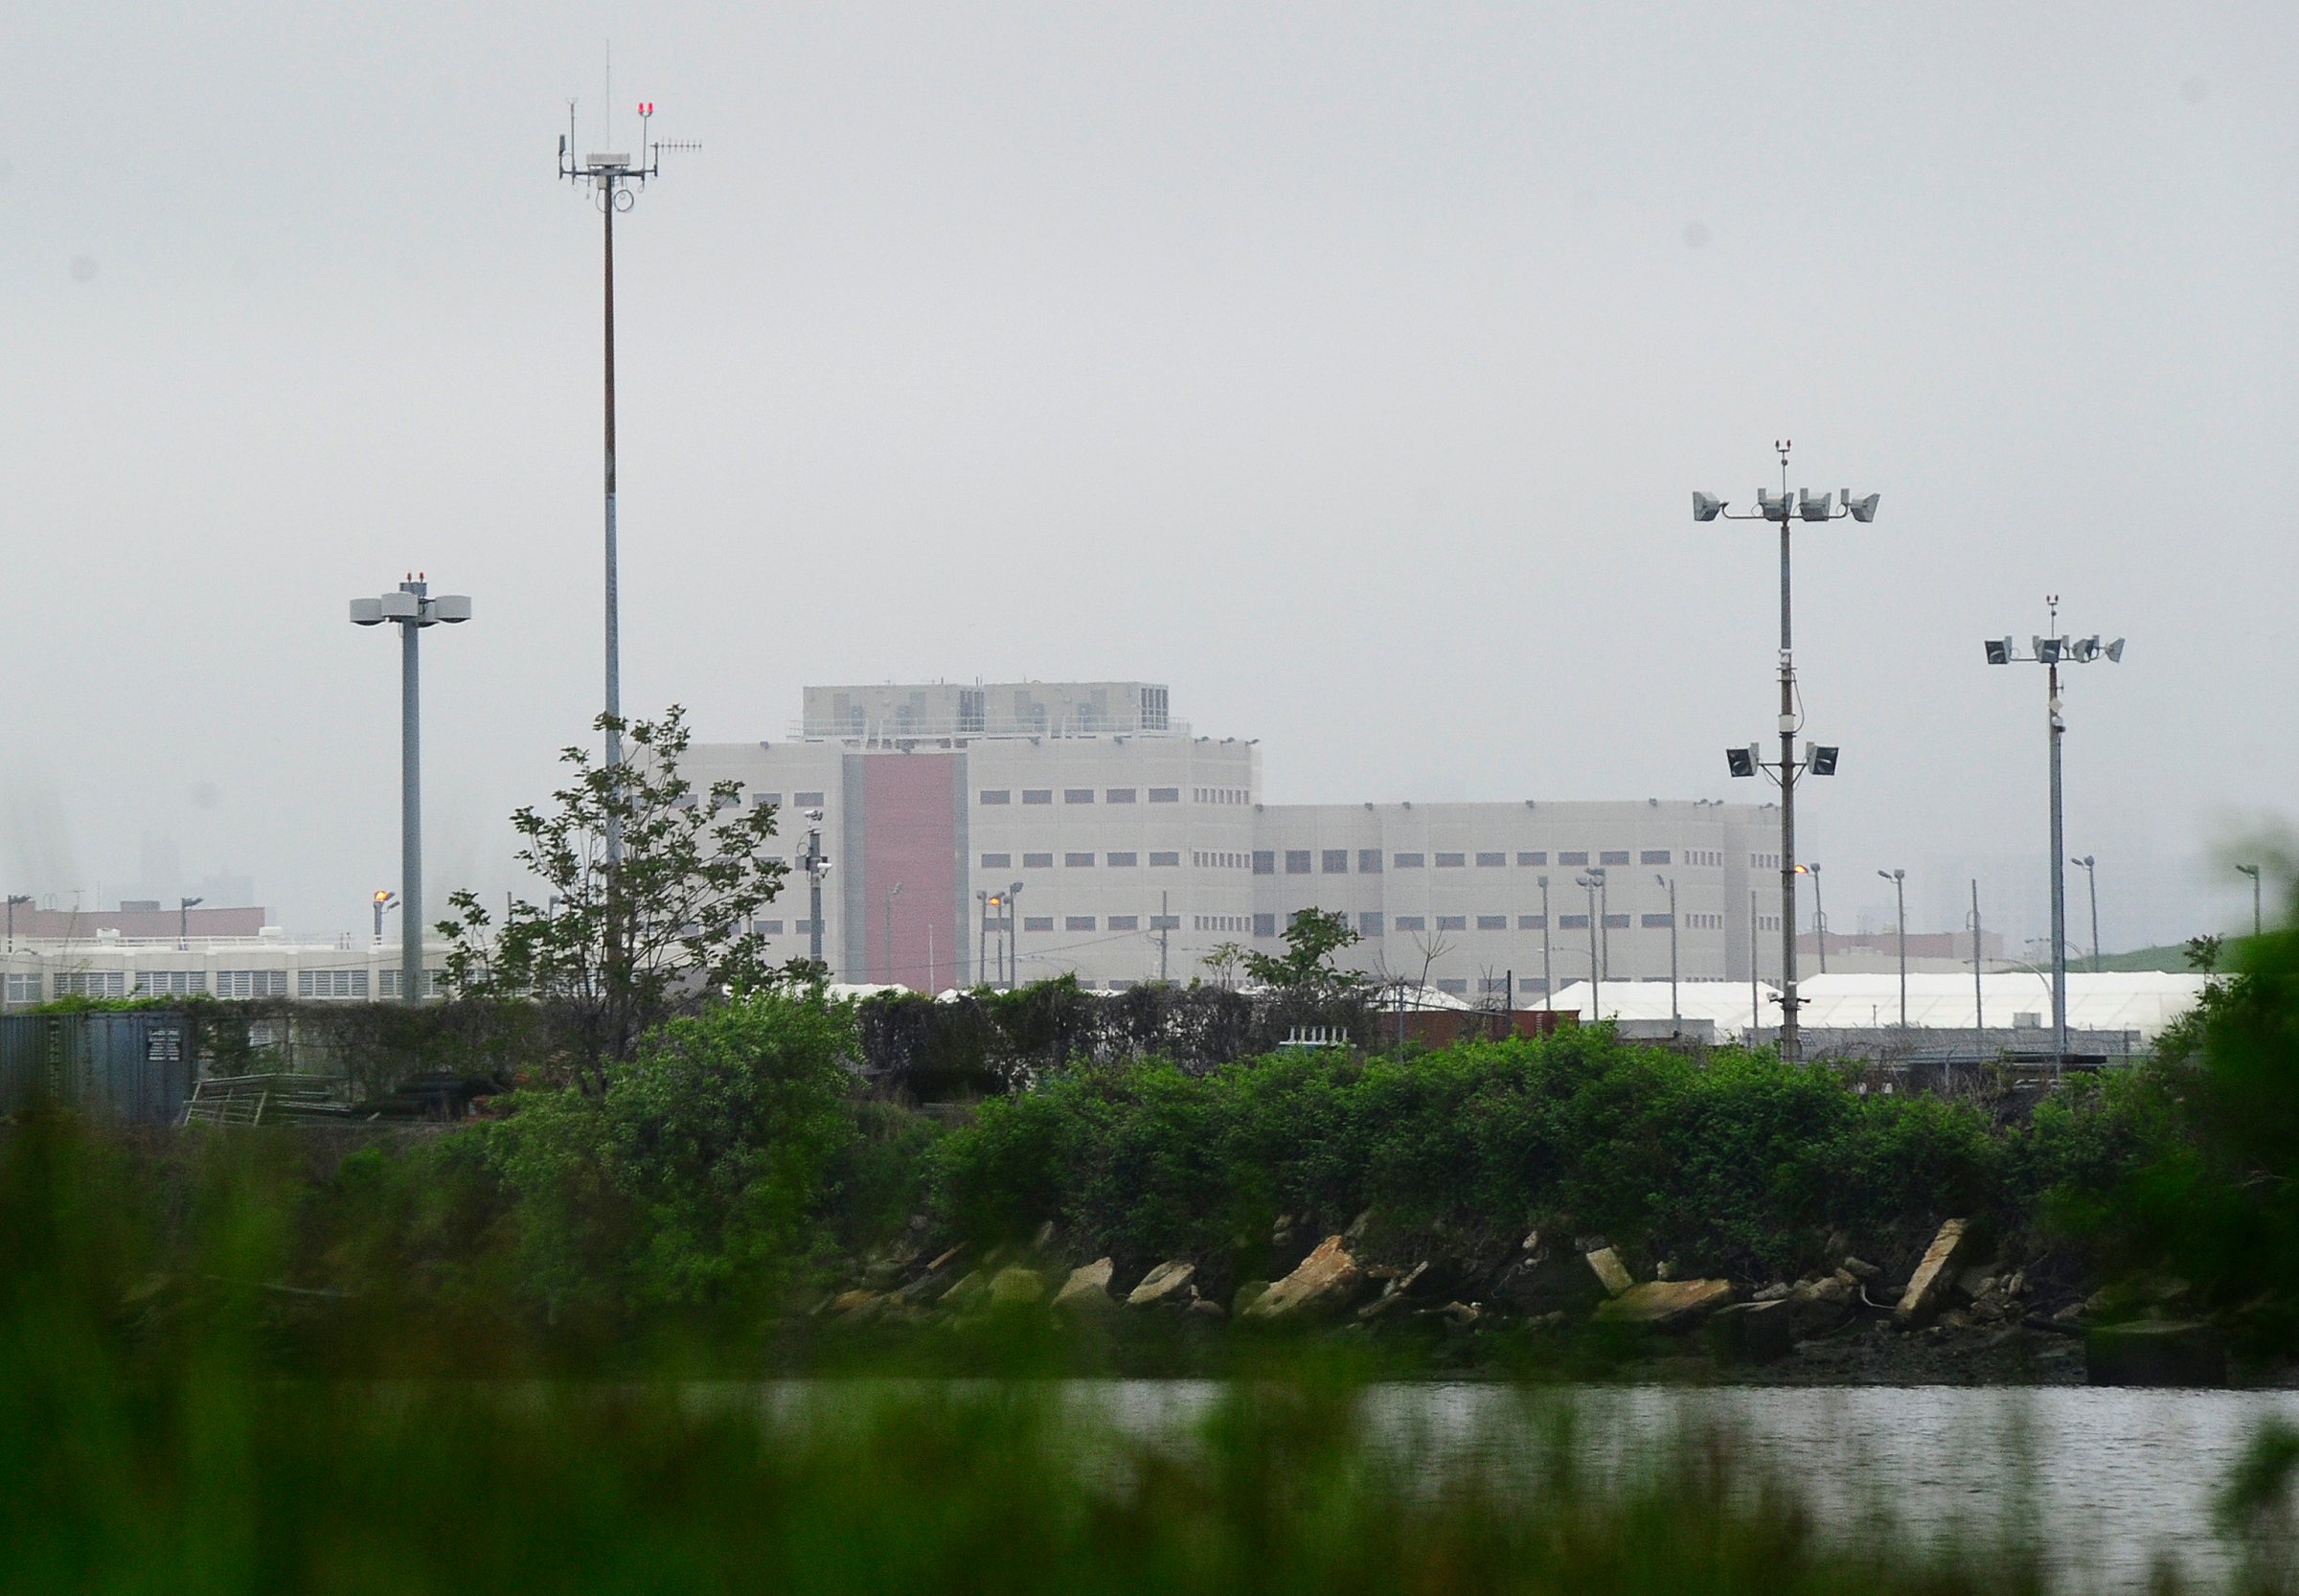 A view of Riker's Island penitentiary complex in New York on May 17, 2011.